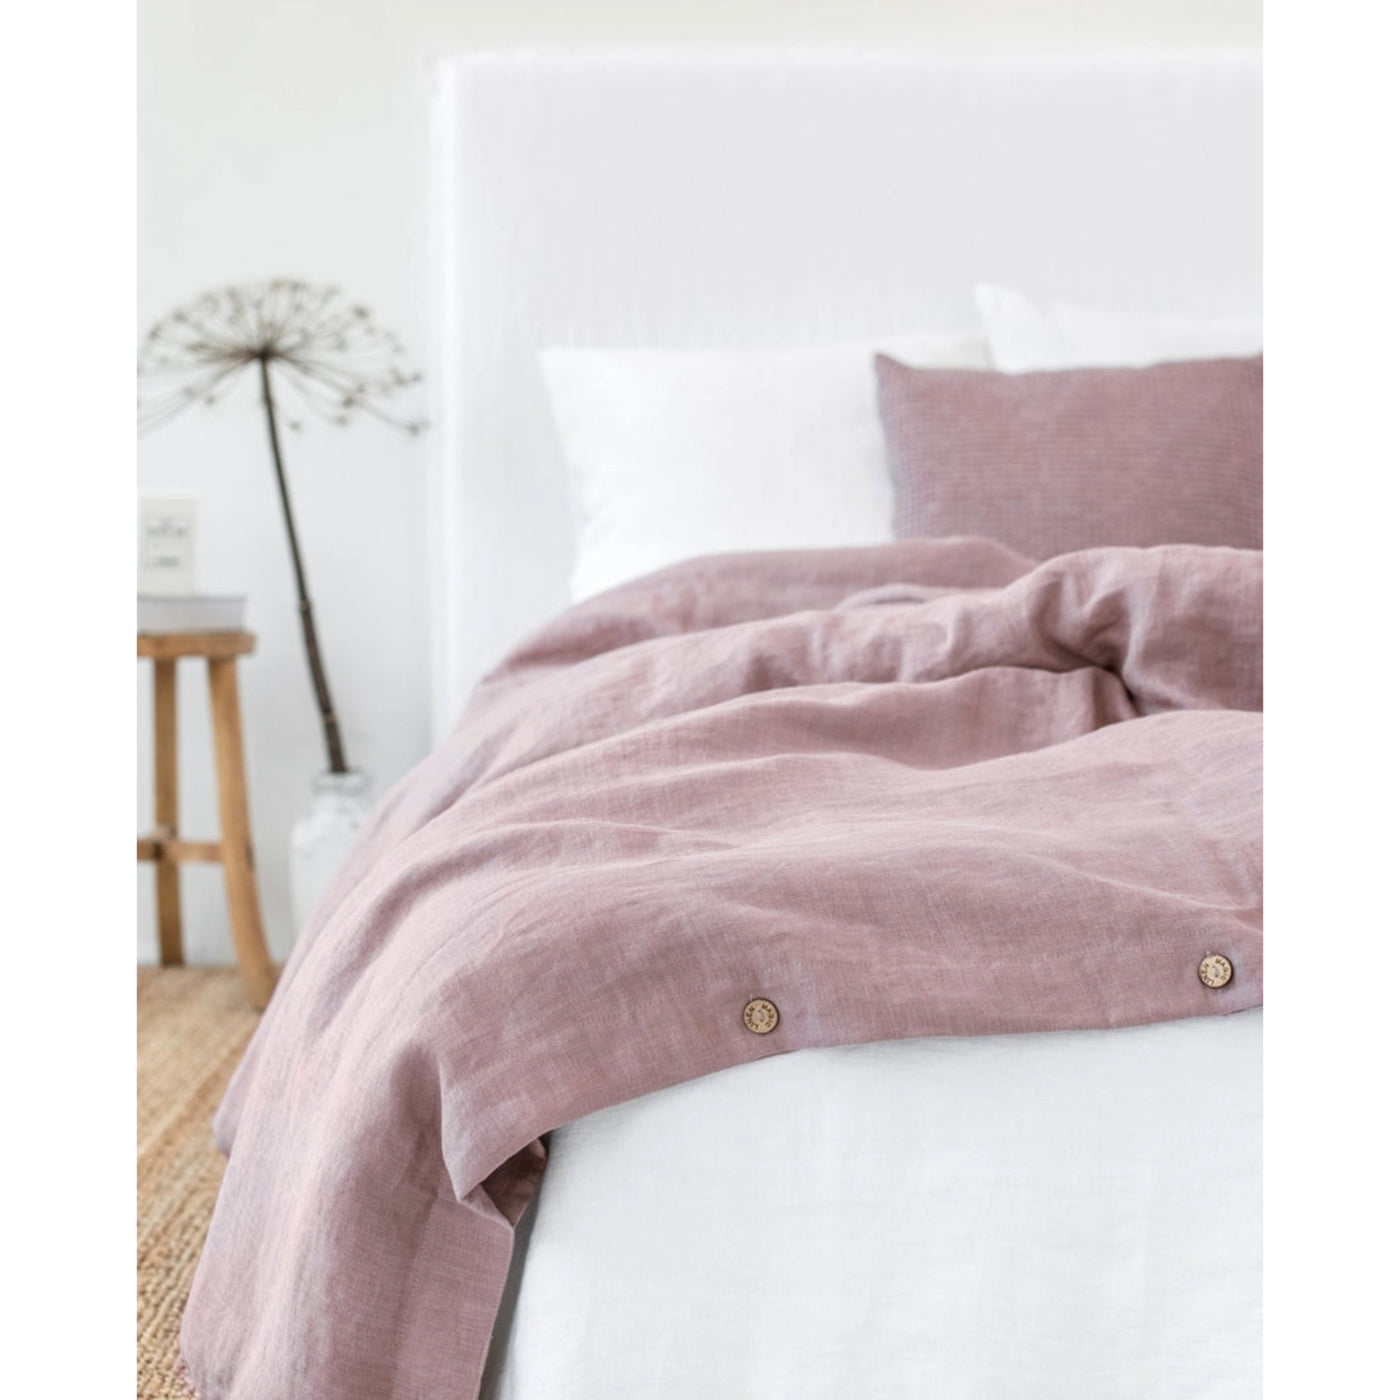 Linen Duvet covers: Dusty Pink - Woodrose color, with coconut buttons & interior ties, displayed on bed in bedroom. ML-DUVETC-000-230-220-WD by Magic Linen brand.